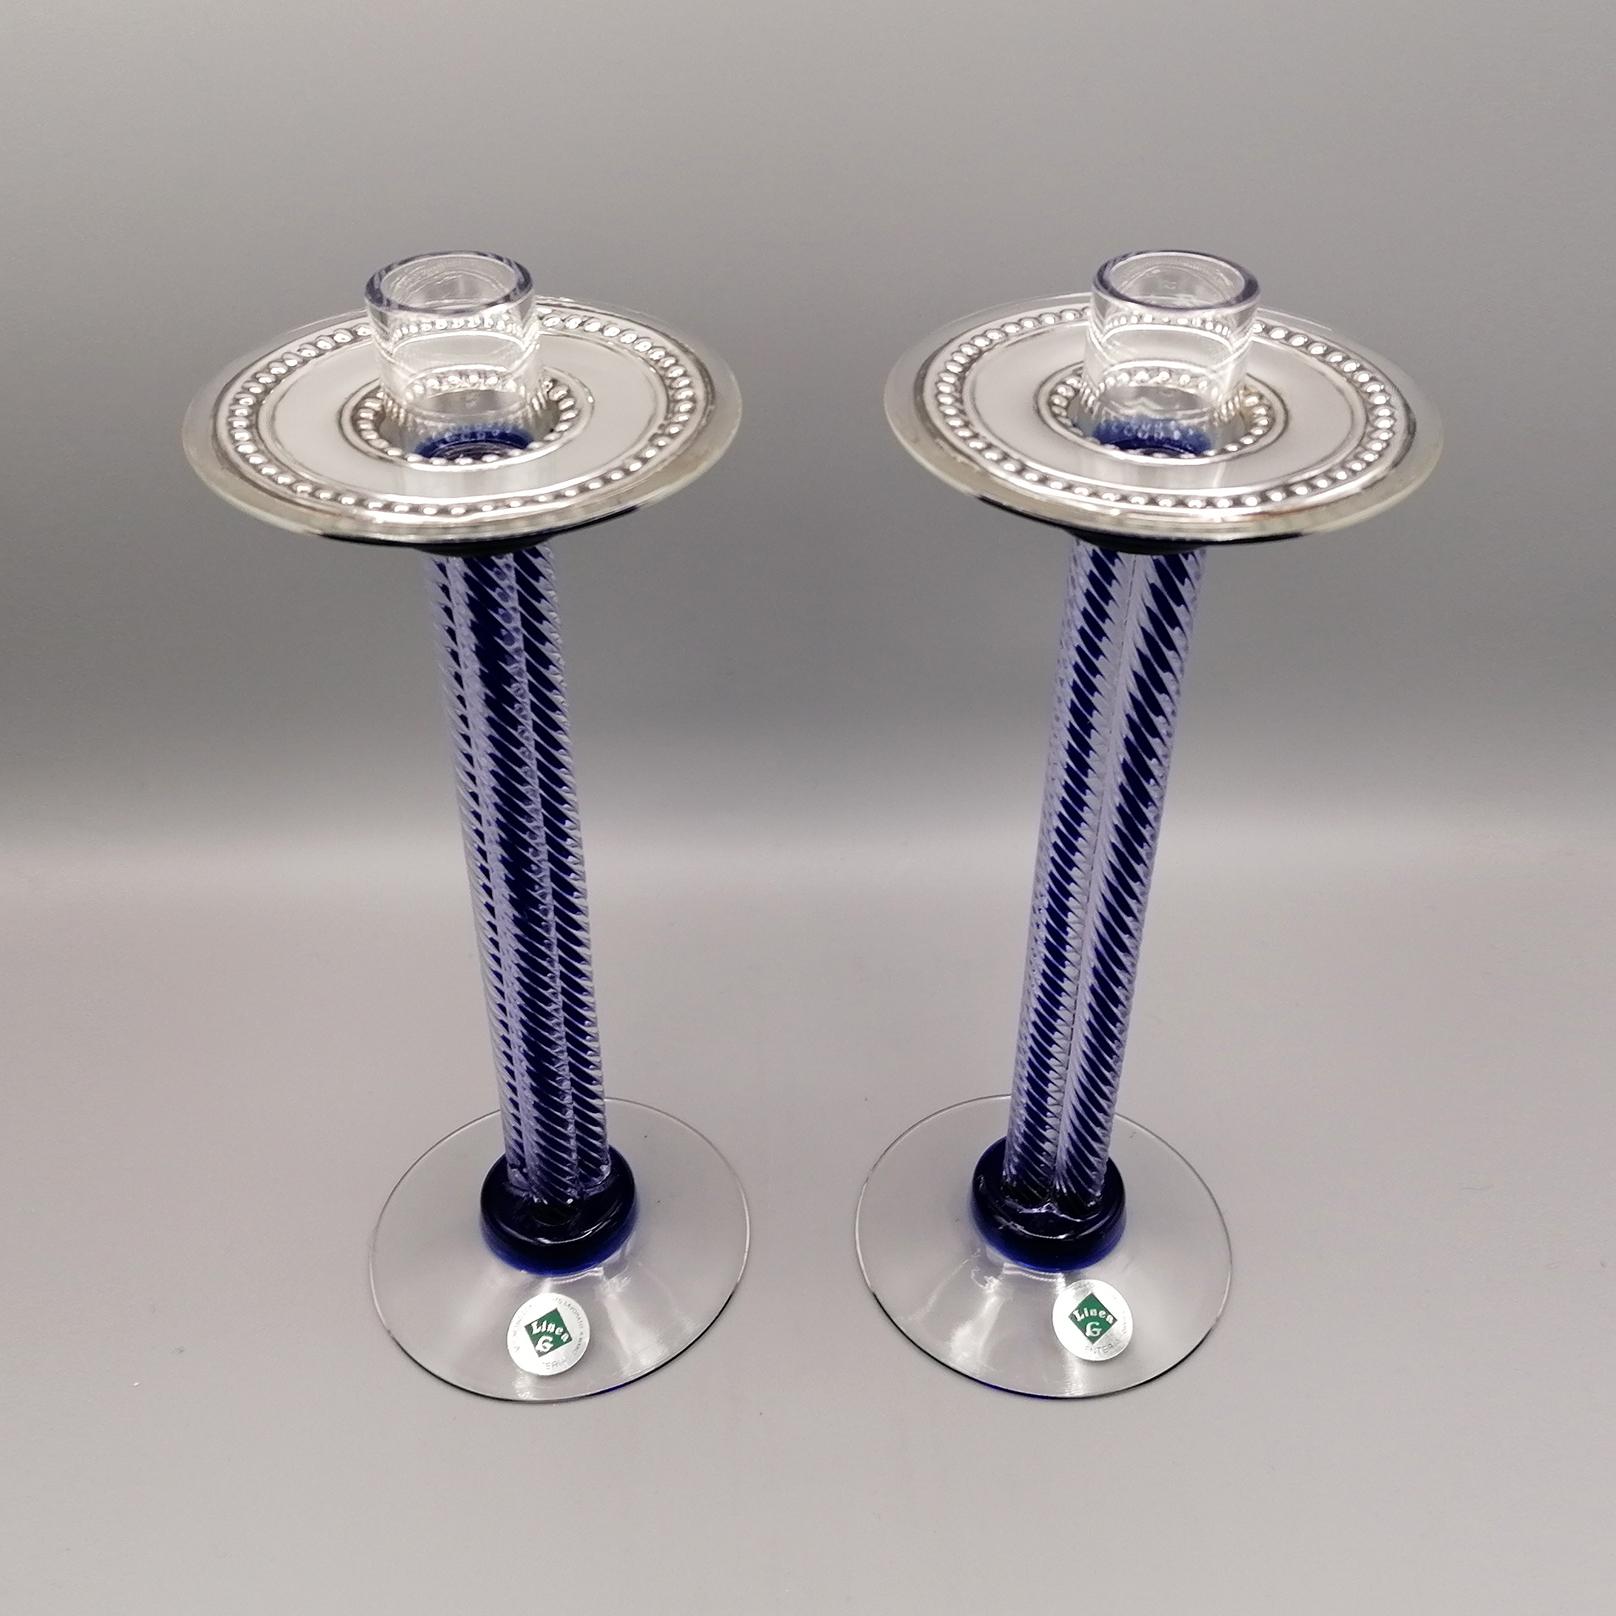 Italian 20th Century Pair of Murano Glass and Sterling Silver Candlesticks